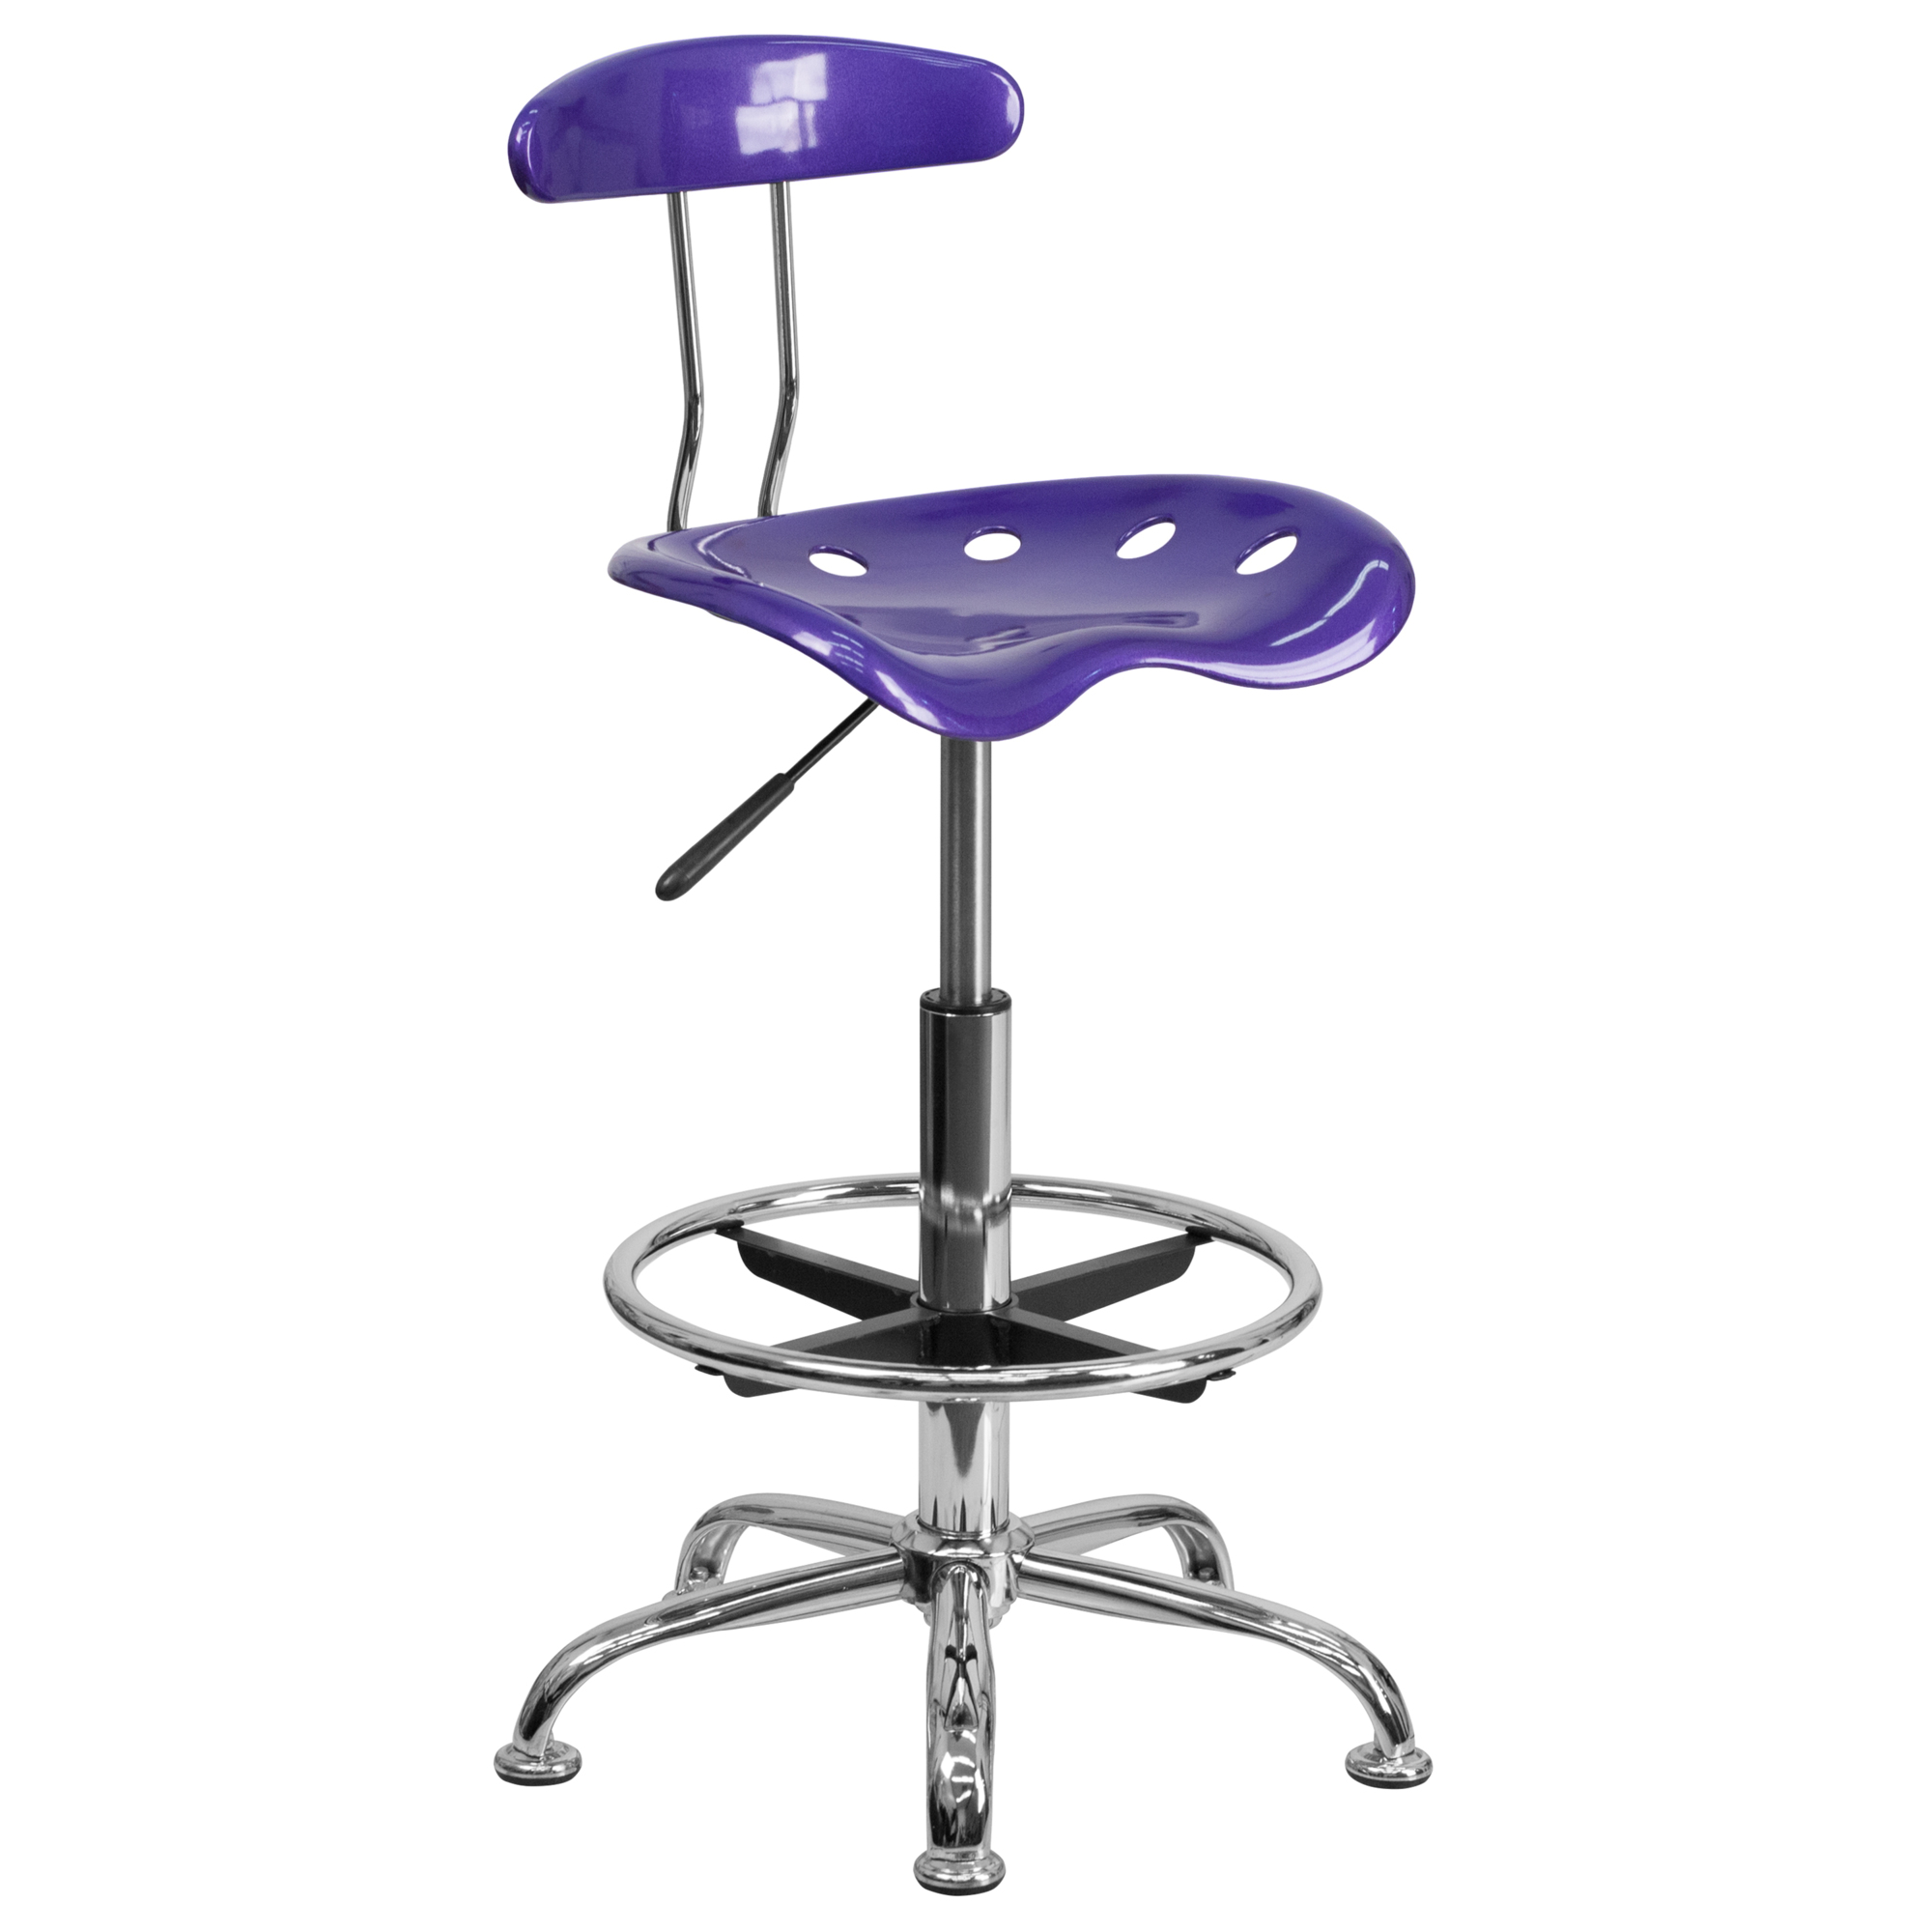 Flash Furniture, Vibrant Violet and Chrome Drafting Stool, Primary Color Purple, Included (qty.) 1, Model LF215VIOLET